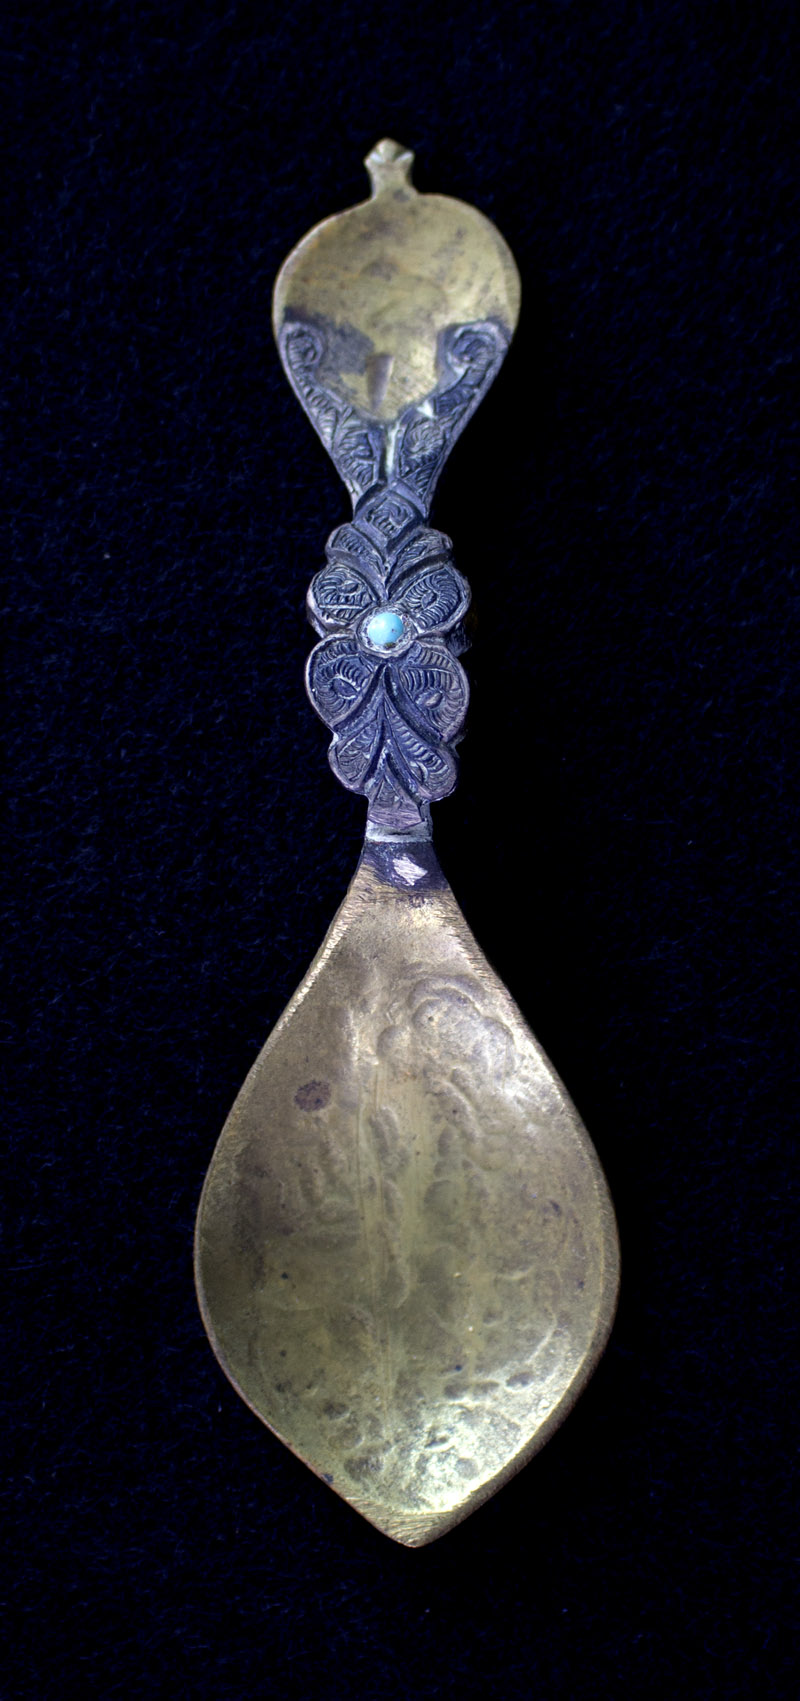 An old, ornate spoon